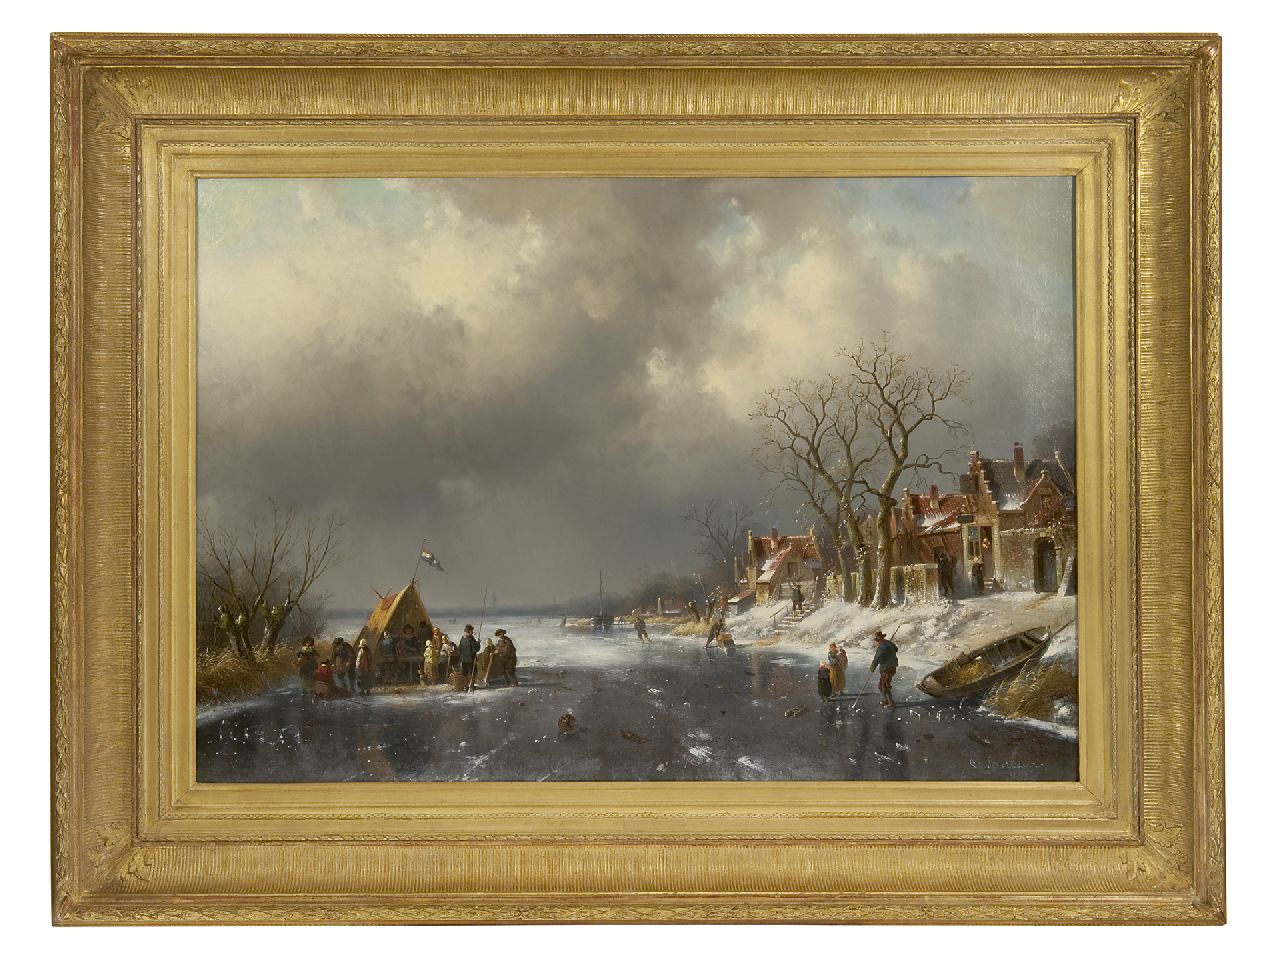 Leickert C.H.J.  | 'Charles' Henri Joseph Leickert, Refreshment stall on the ice on the outskirts of a village, oil on canvas 71.4 x 103.2 cm, signed l.r.